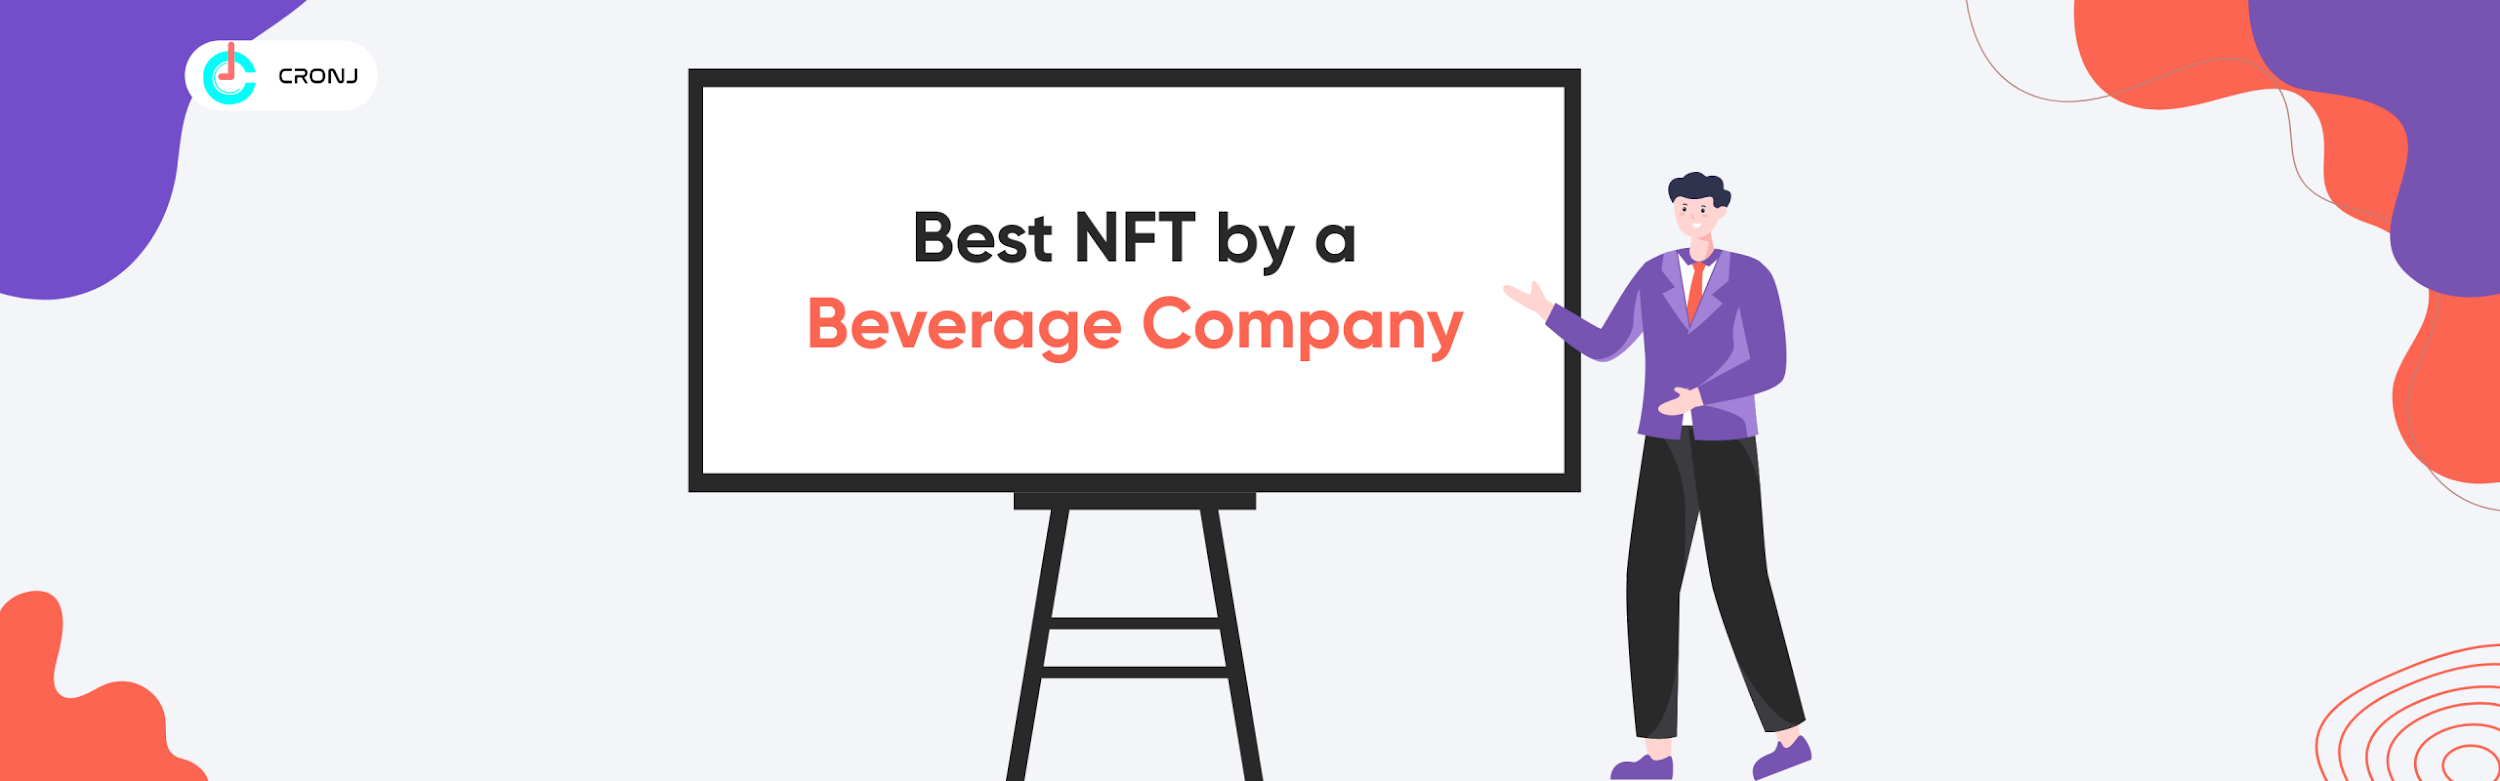 Best NFT by a Beverage Company